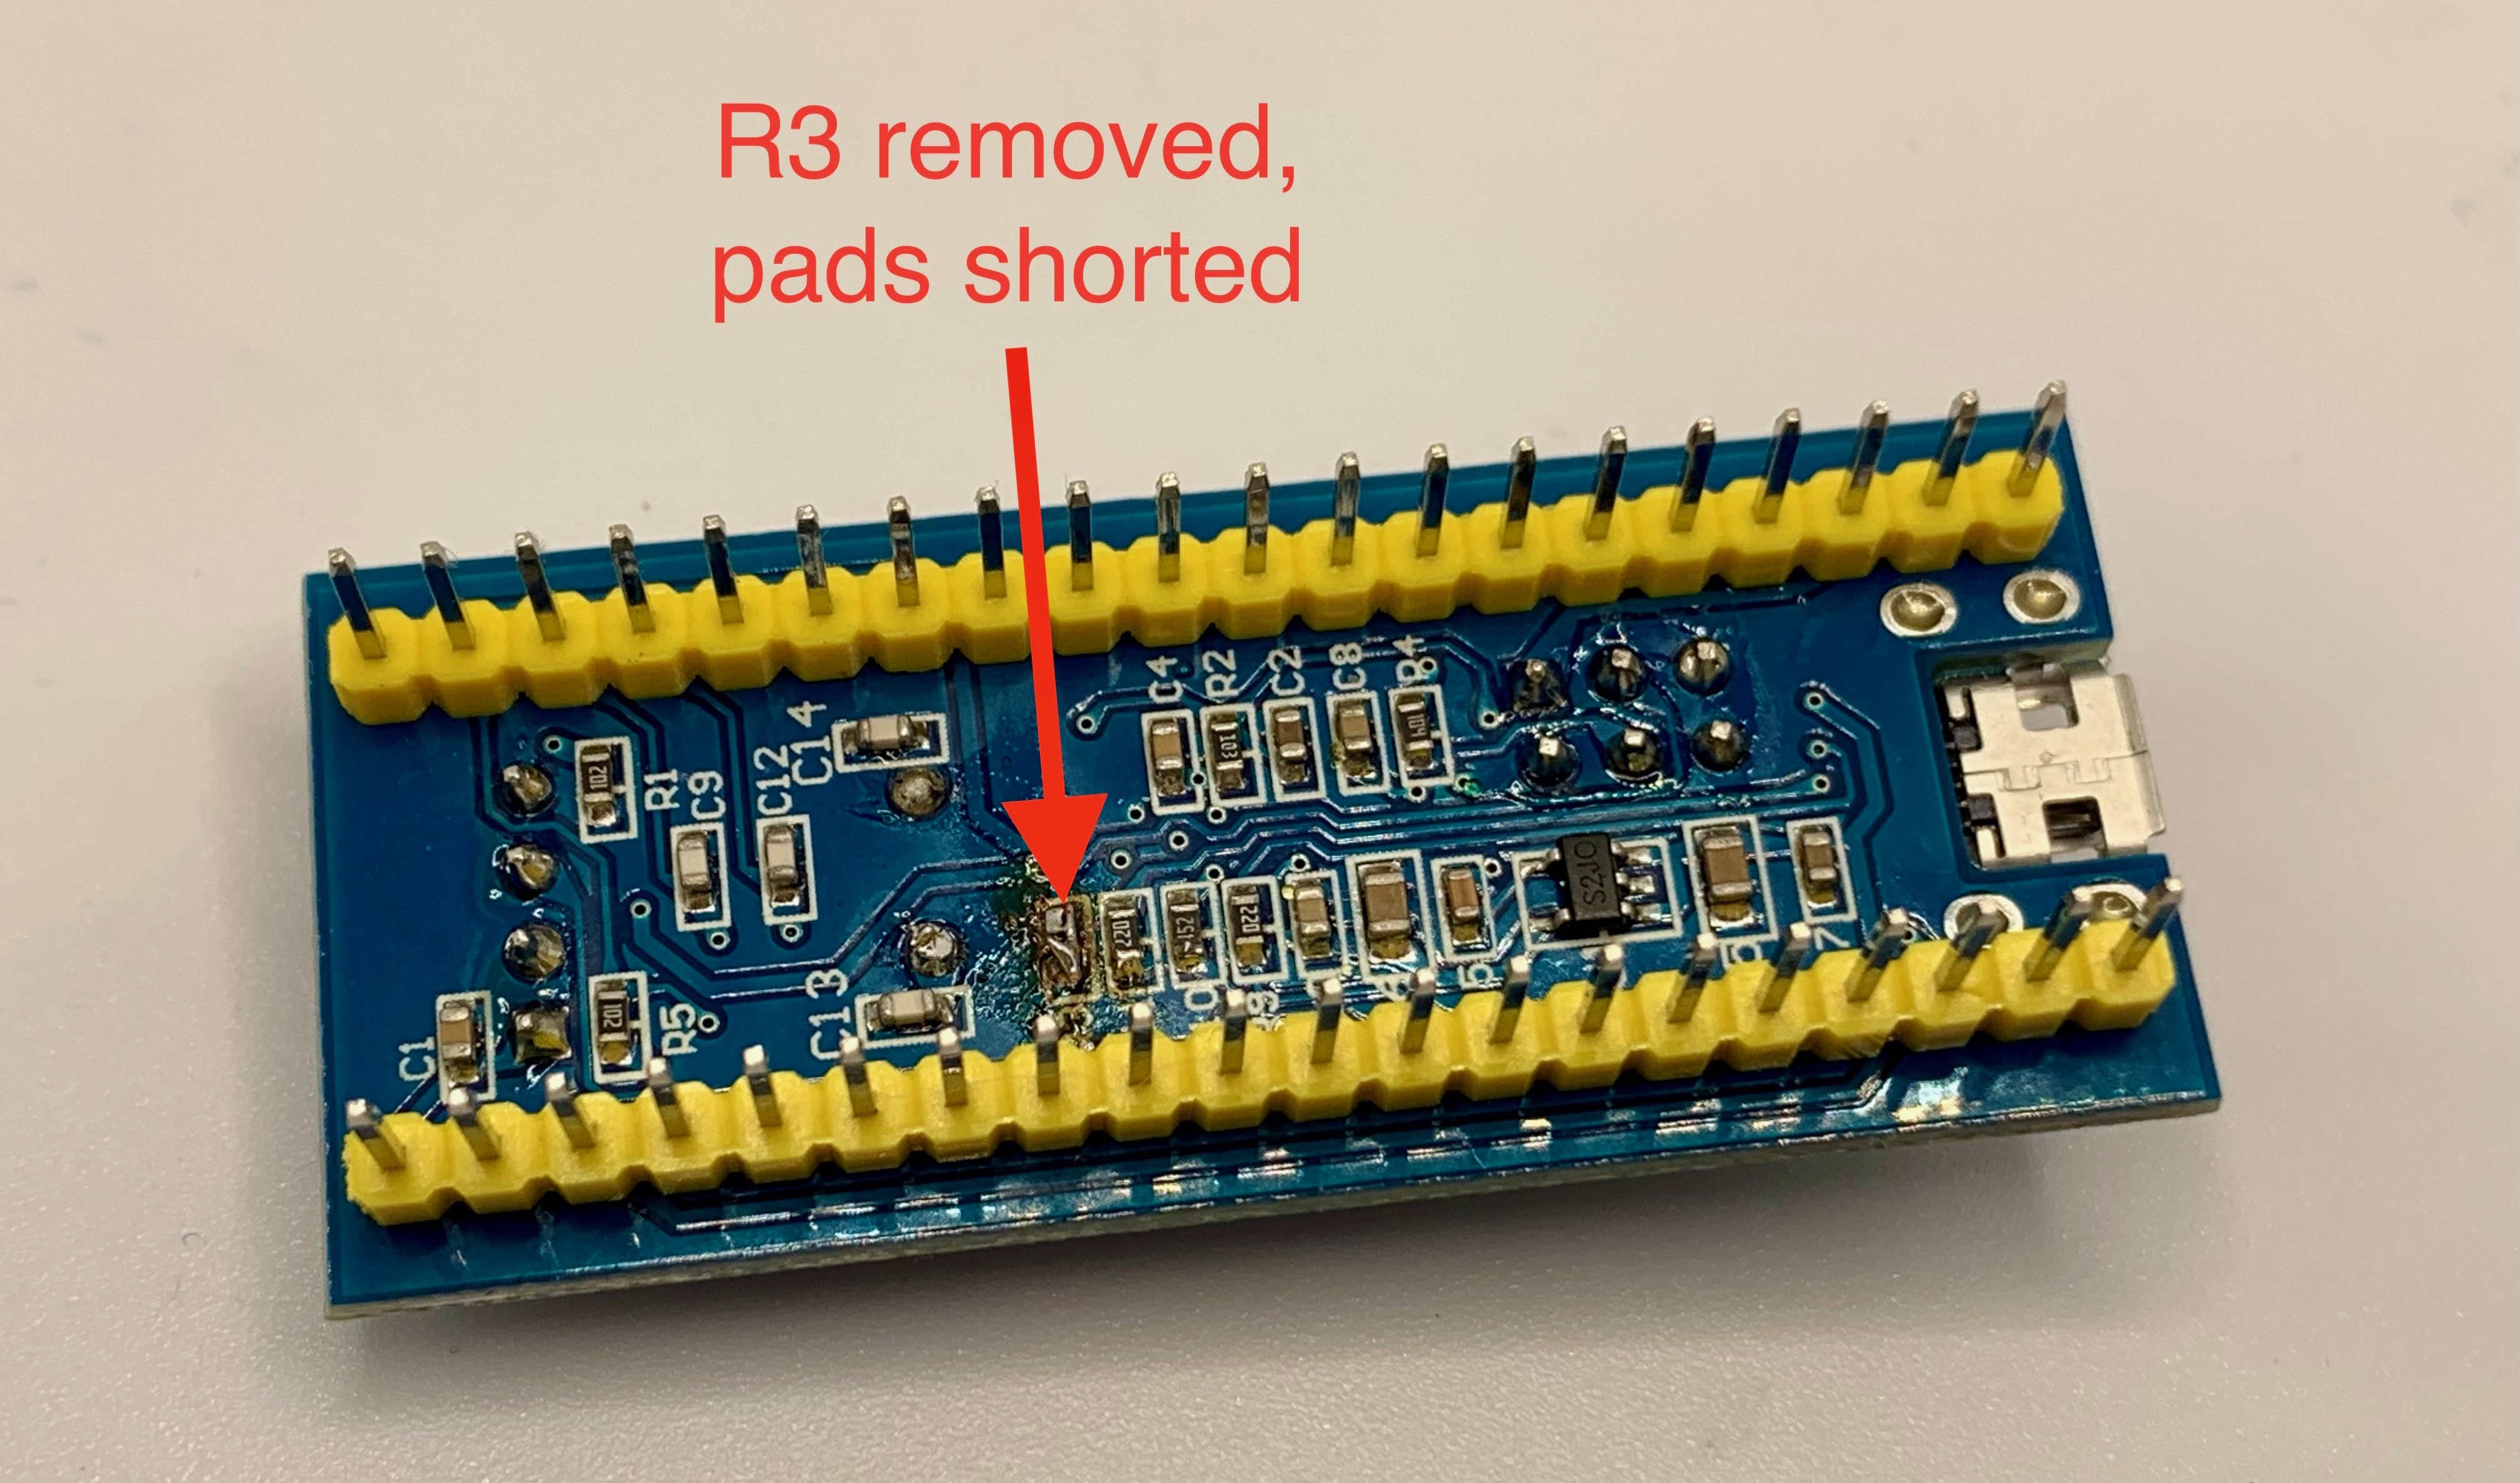 R3 removed, pads shorted